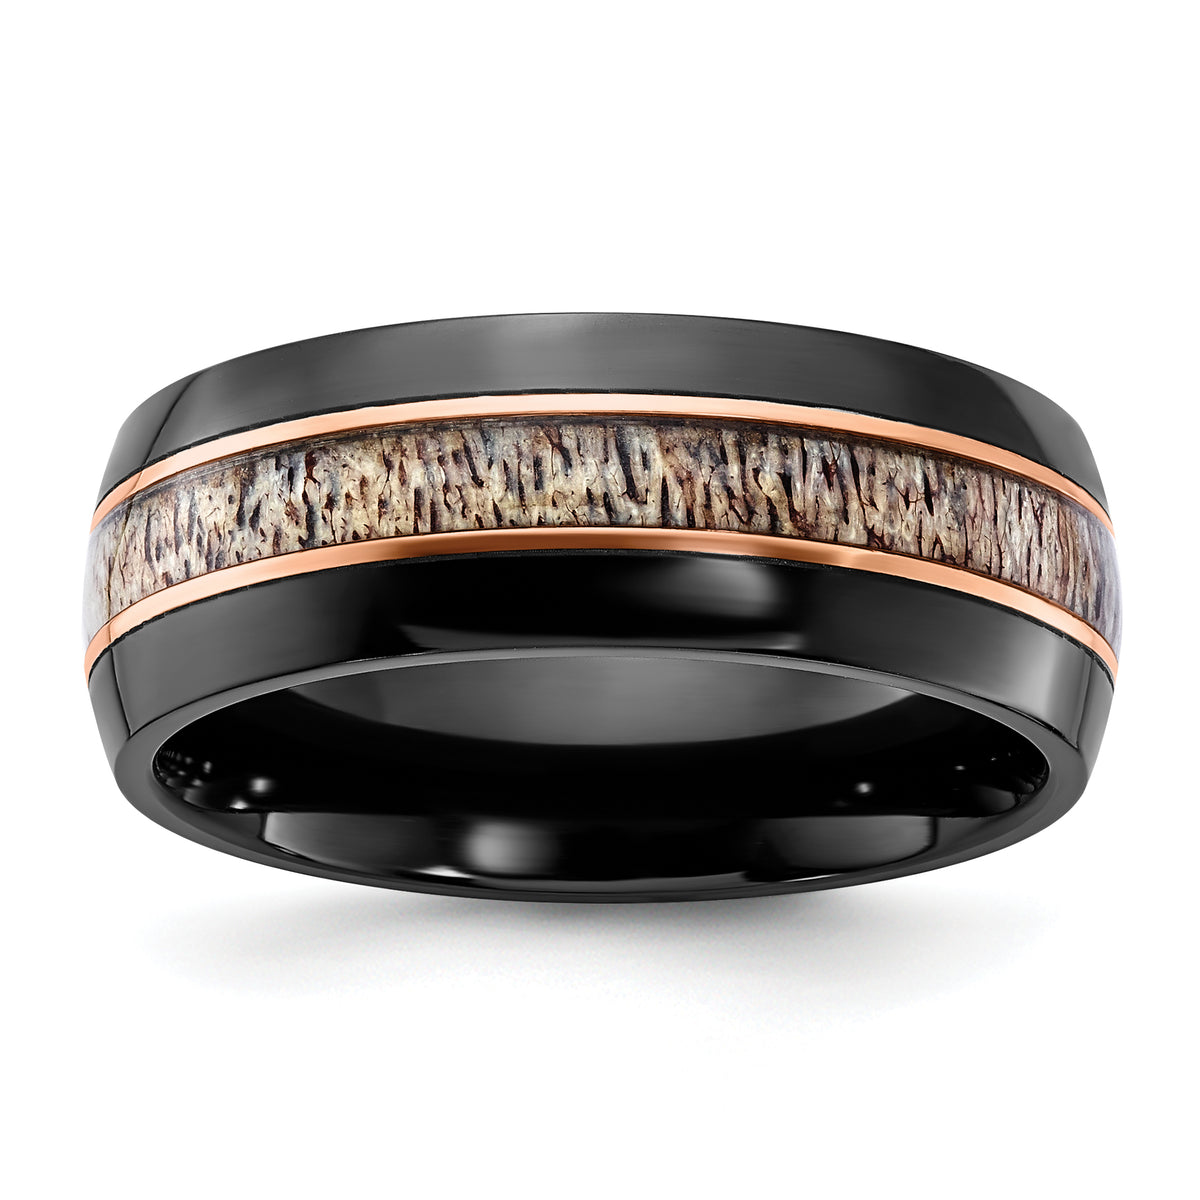 Black Zirconium Polished Rose IP-plated with Antler Inlay 8mm Band